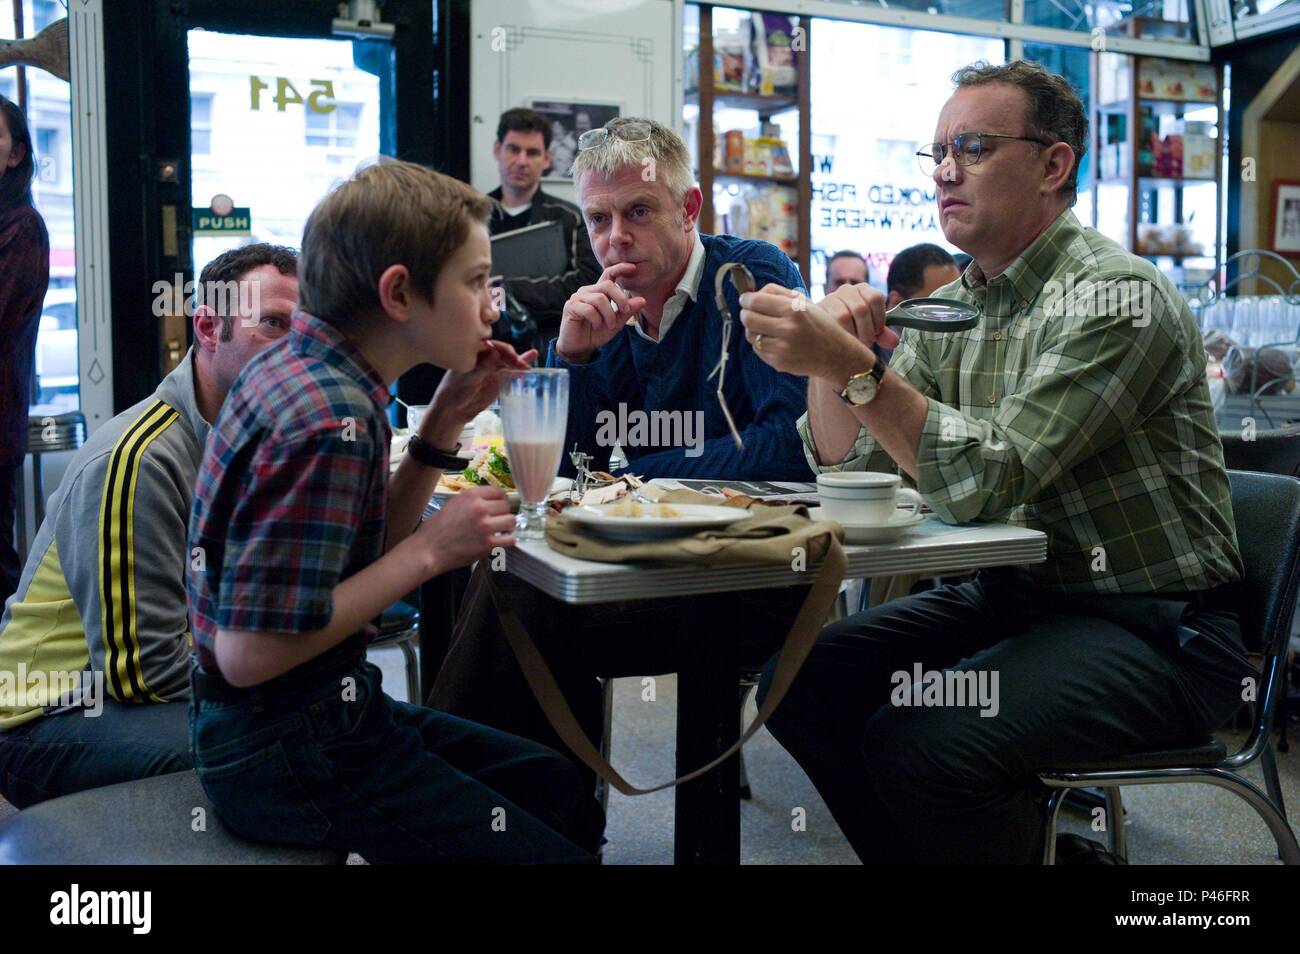 Original Film Title: EXTREMELY LOUD AND INCREDIBLY CLOSE.  English Title: EXTREMELY LOUD AND INCREDIBLY CLOSE.  Film Director: STEPHEN DALDRY.  Year: 2011.  Stars: TOM HANKS; STEPHEN DALDRY; THOMAS HORN. Credit: PARAMOUNT PICTURES / Album Stock Photo